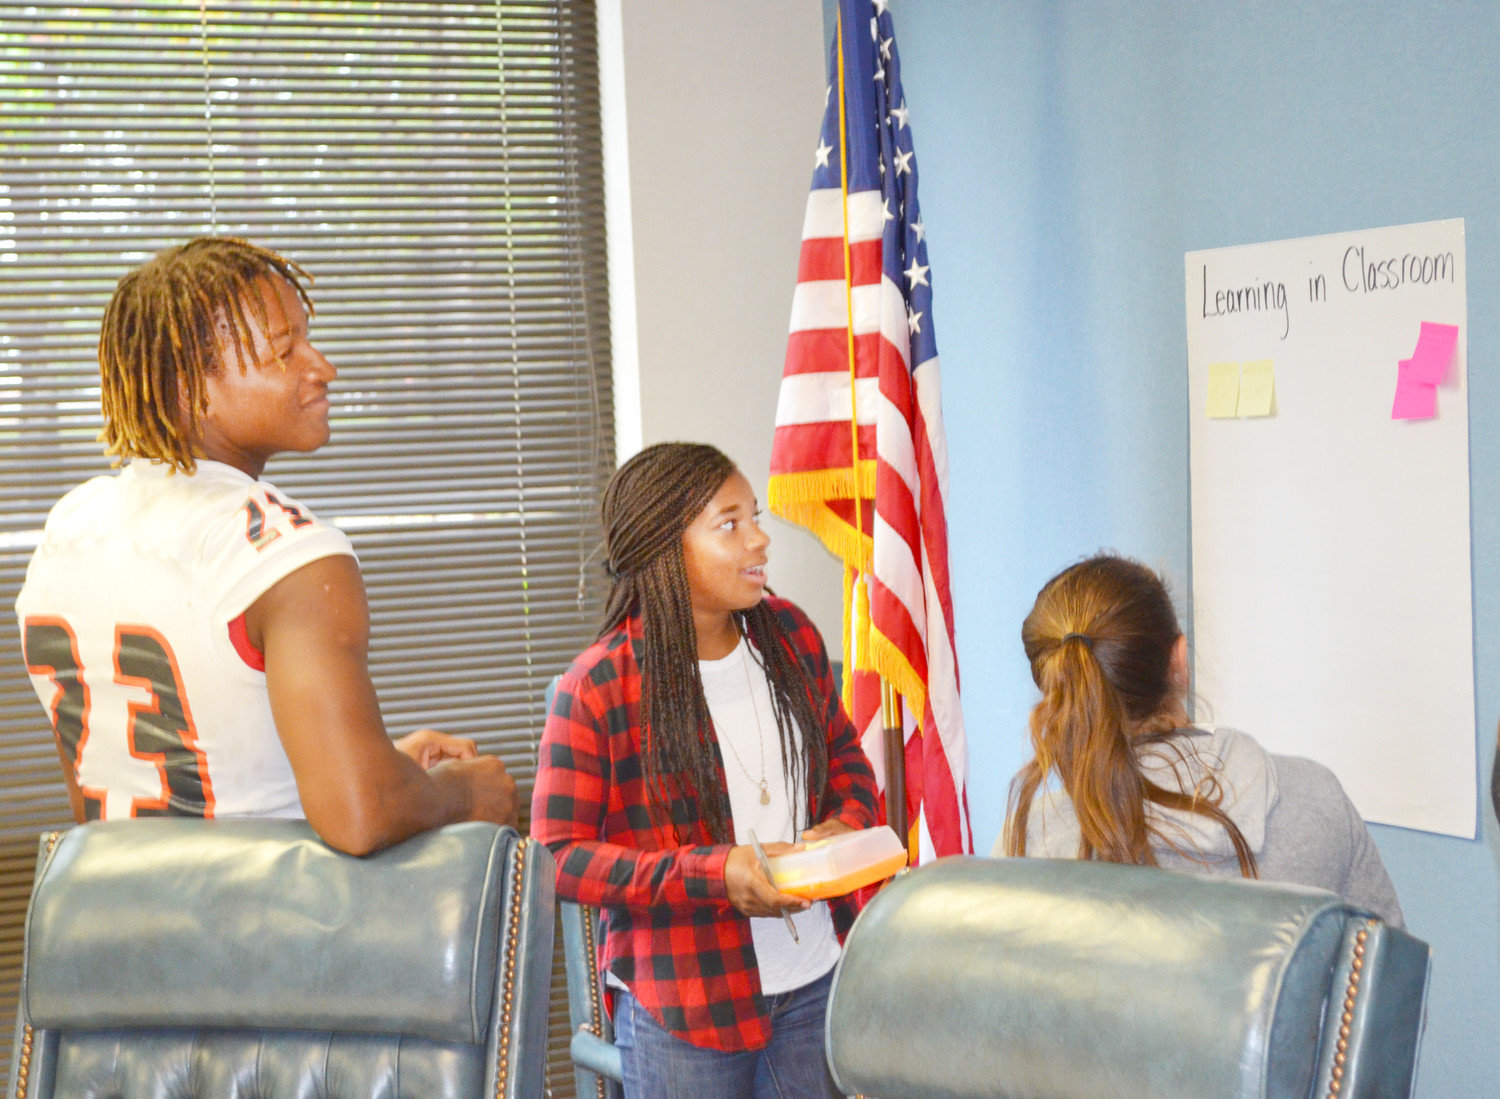 From left, Trevion Sneed, Abby Kratzmeyer and Lilyanne Windle post suggestions for how to improve learning in the classroom. (Monitor photos by Hank Murphy).